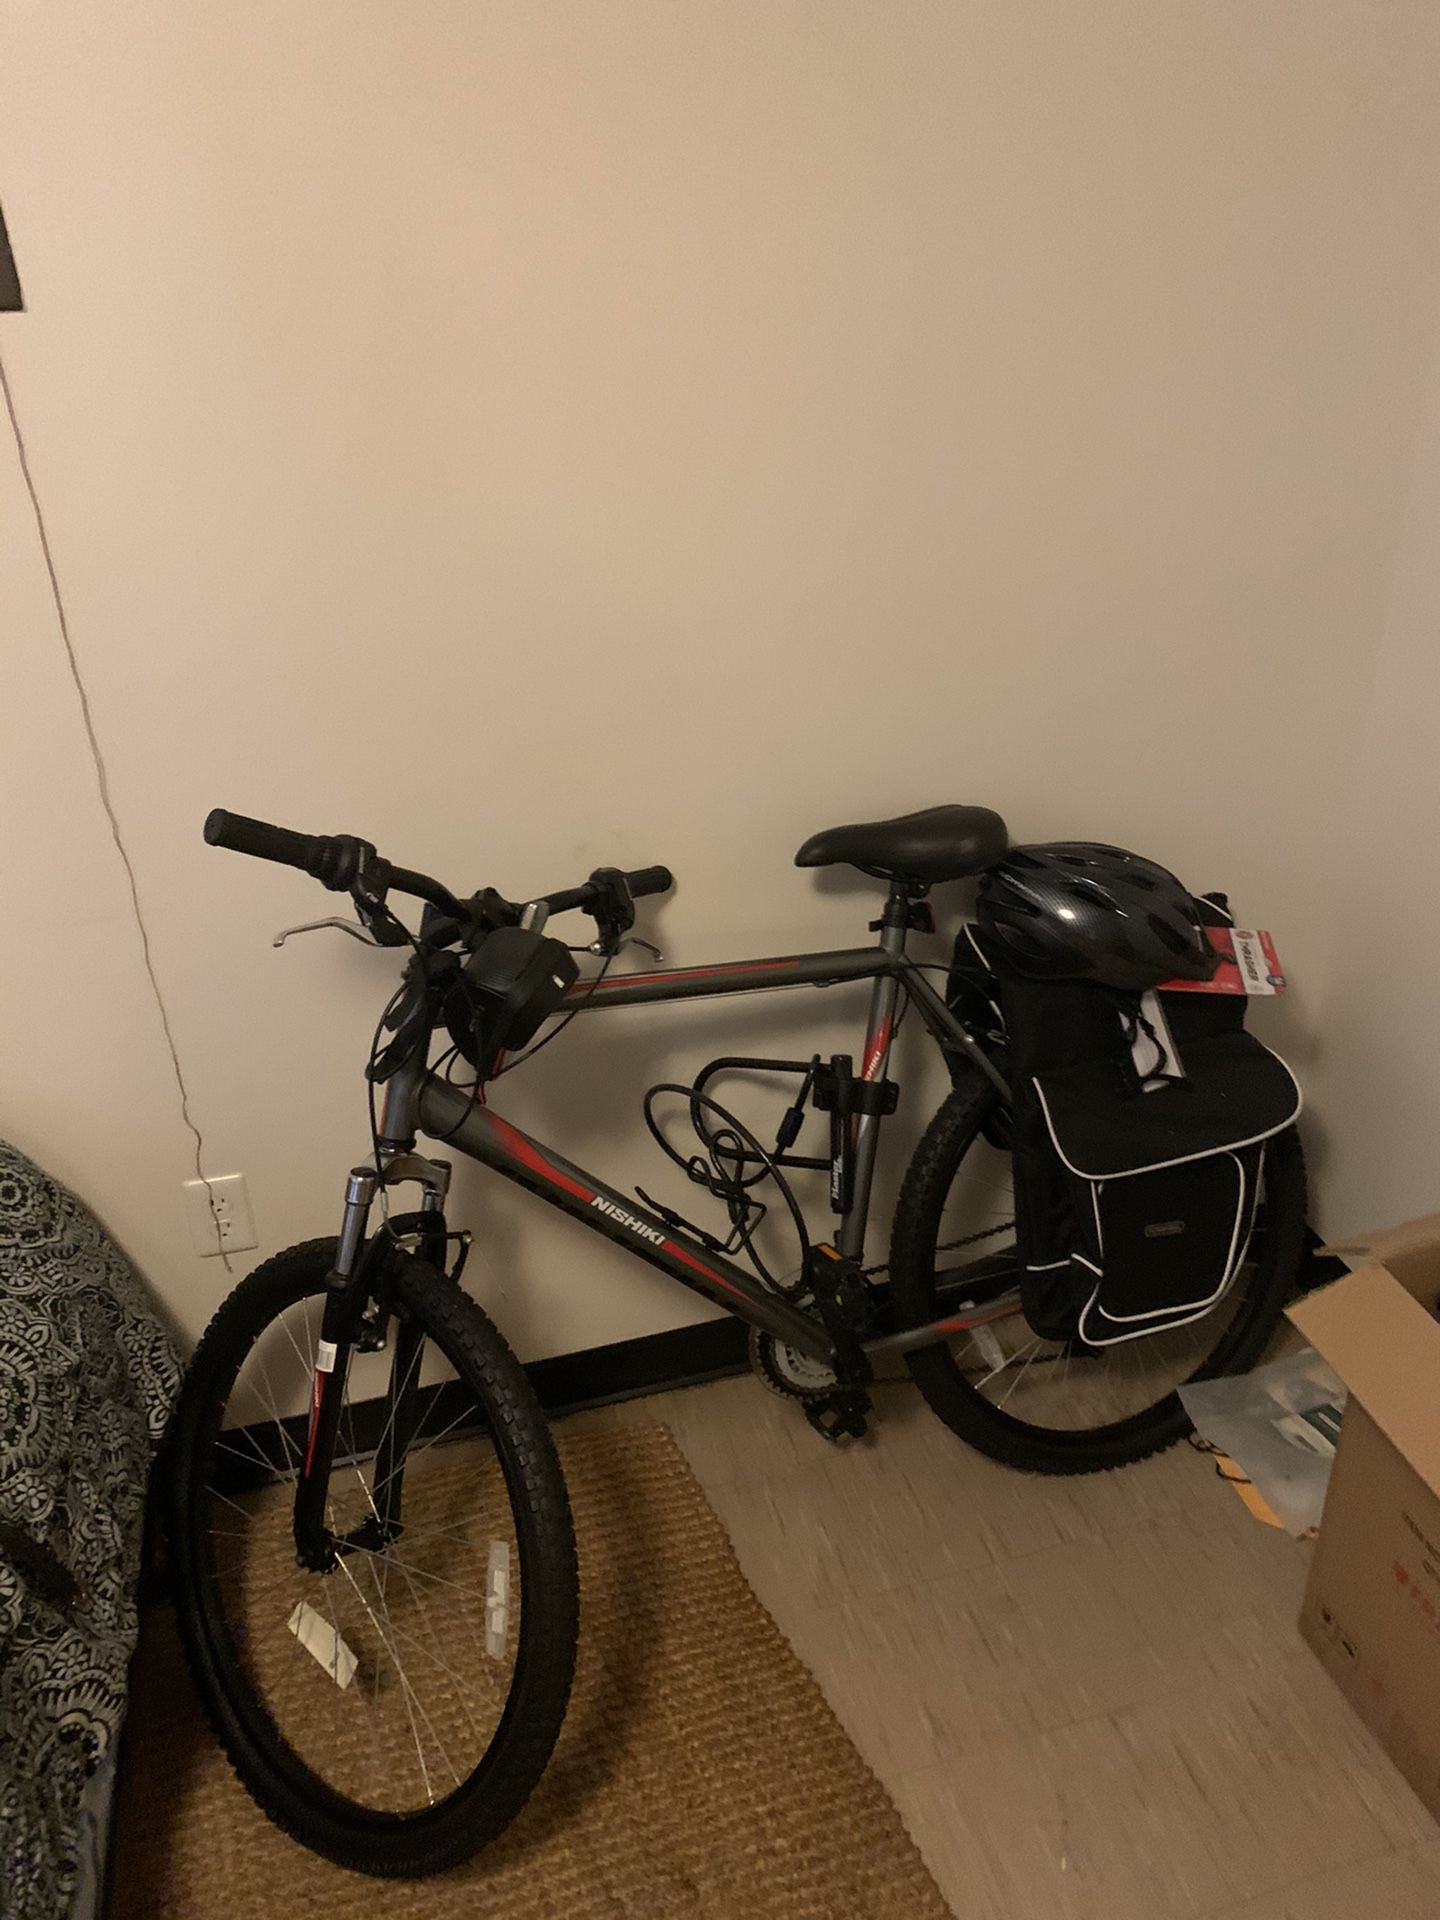 New bike with exercise stand for inside use!